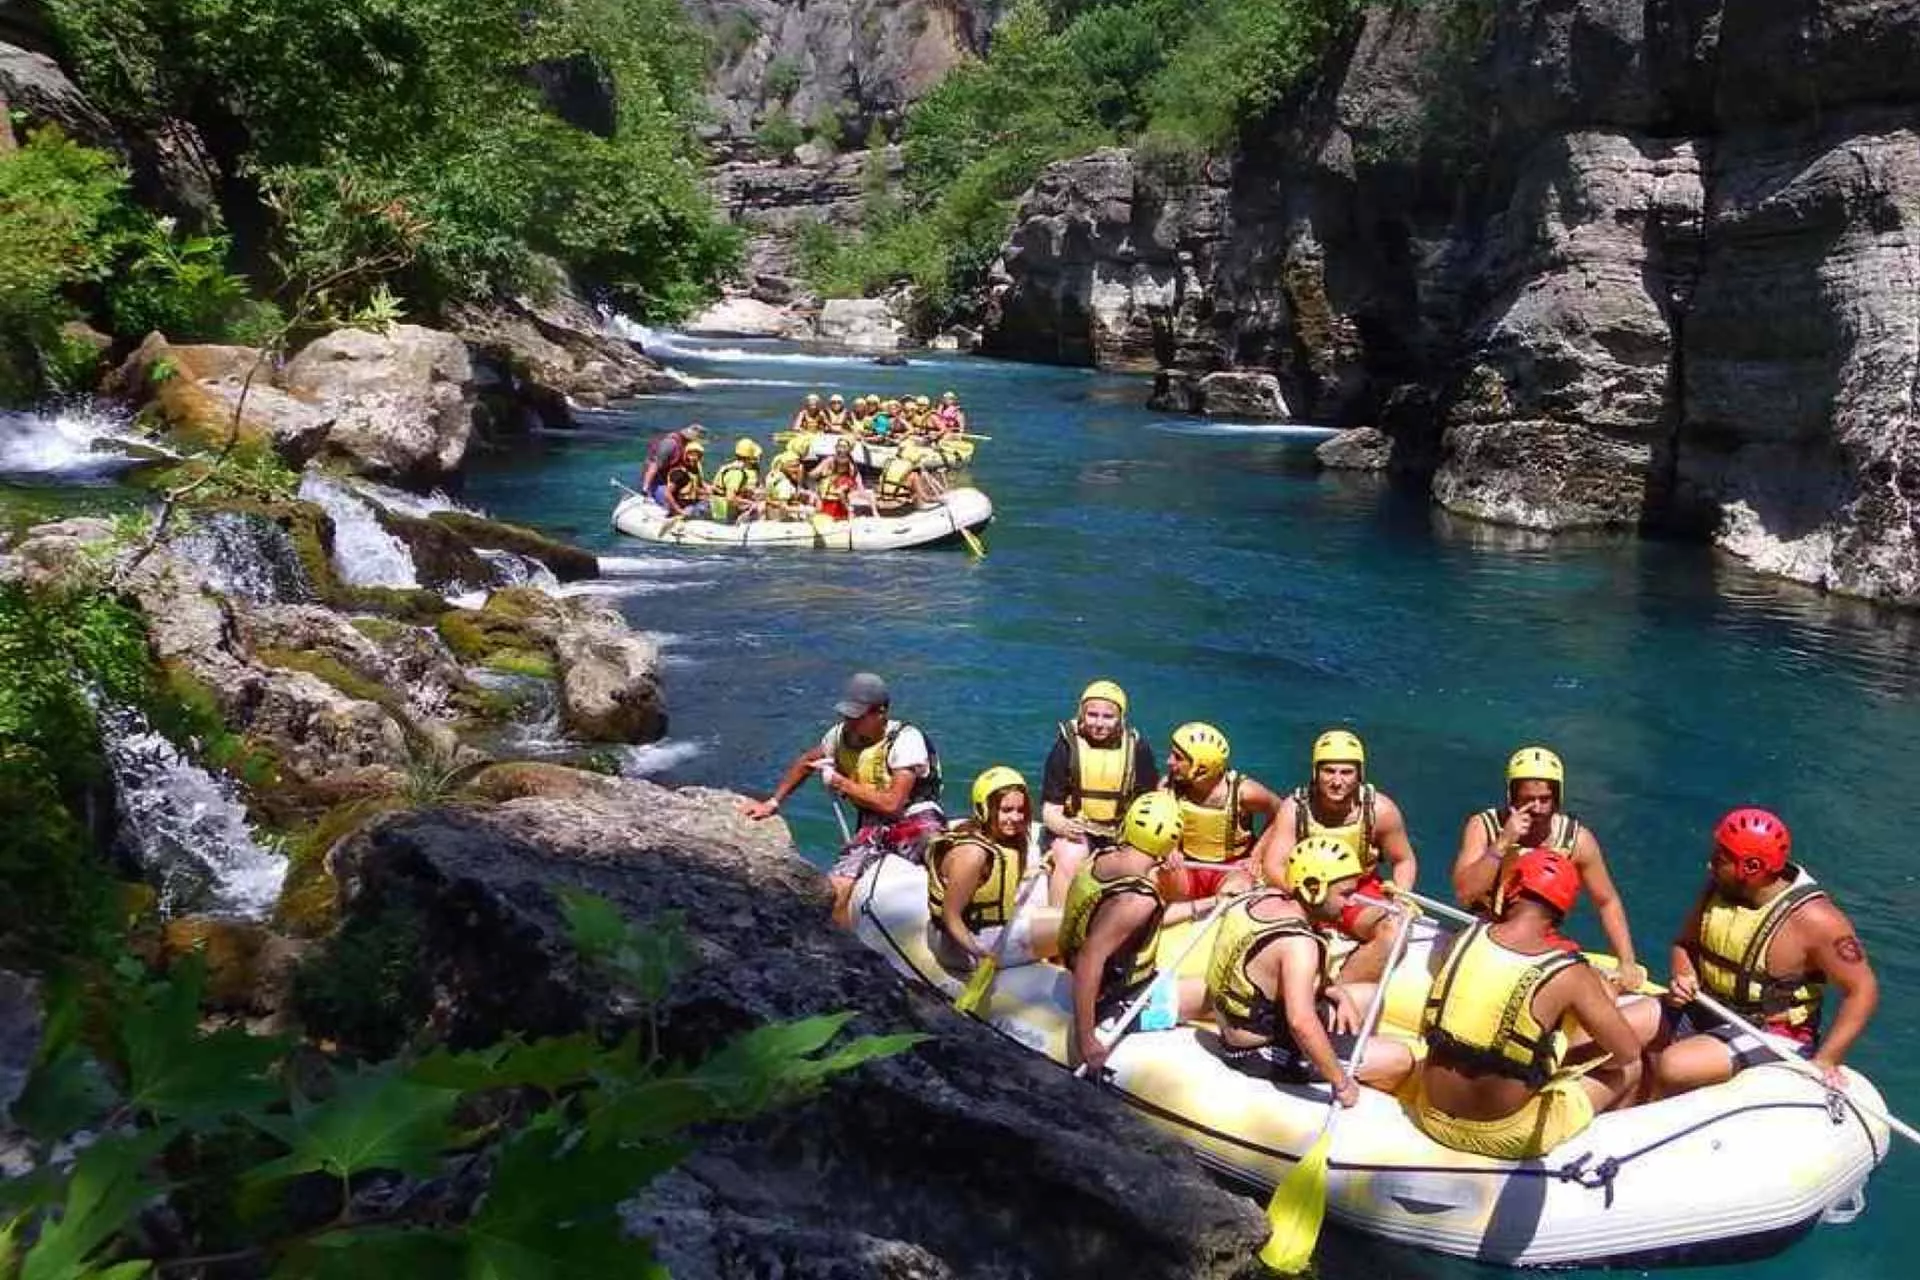 Alanya Rafting in Turkey, Central Asia | Rafting - Rated 4.3